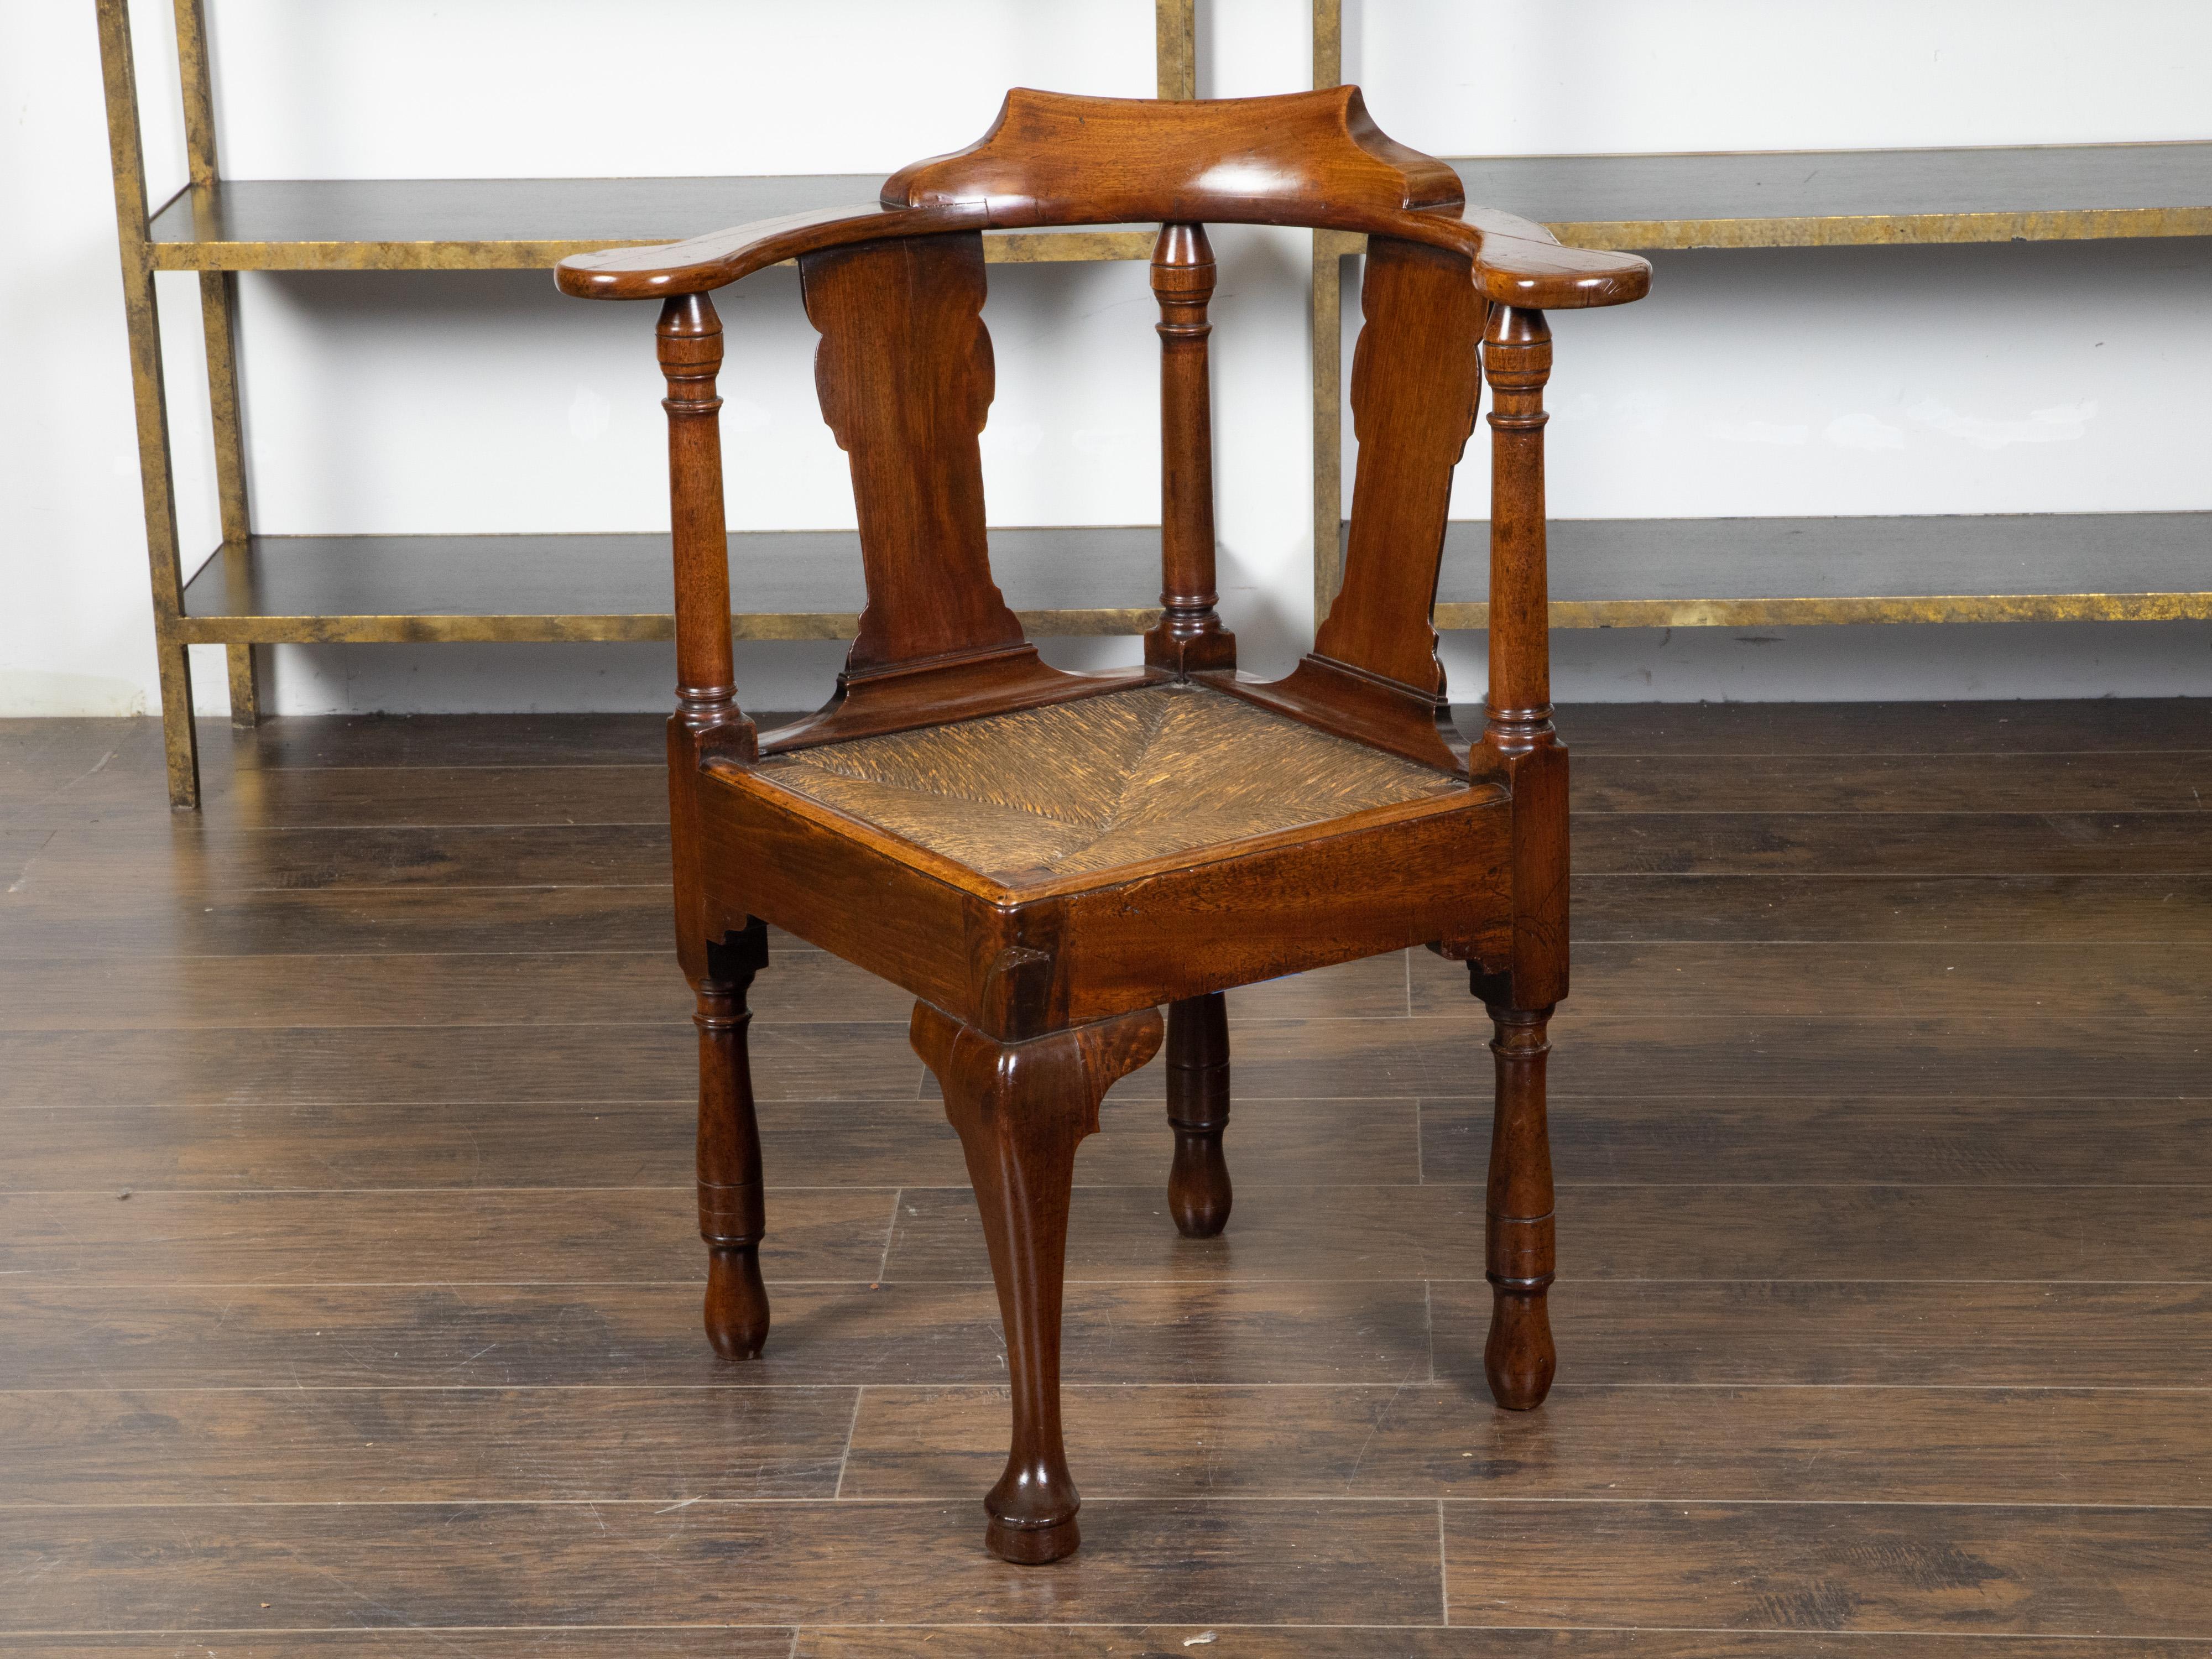 An English mahogany corner chair from the early 19th century, with carved crest, rush seat and front cabriole leg. Created in England during the first quarter of the 19th century, this mahogany corner chair features a pierced back alternating carved